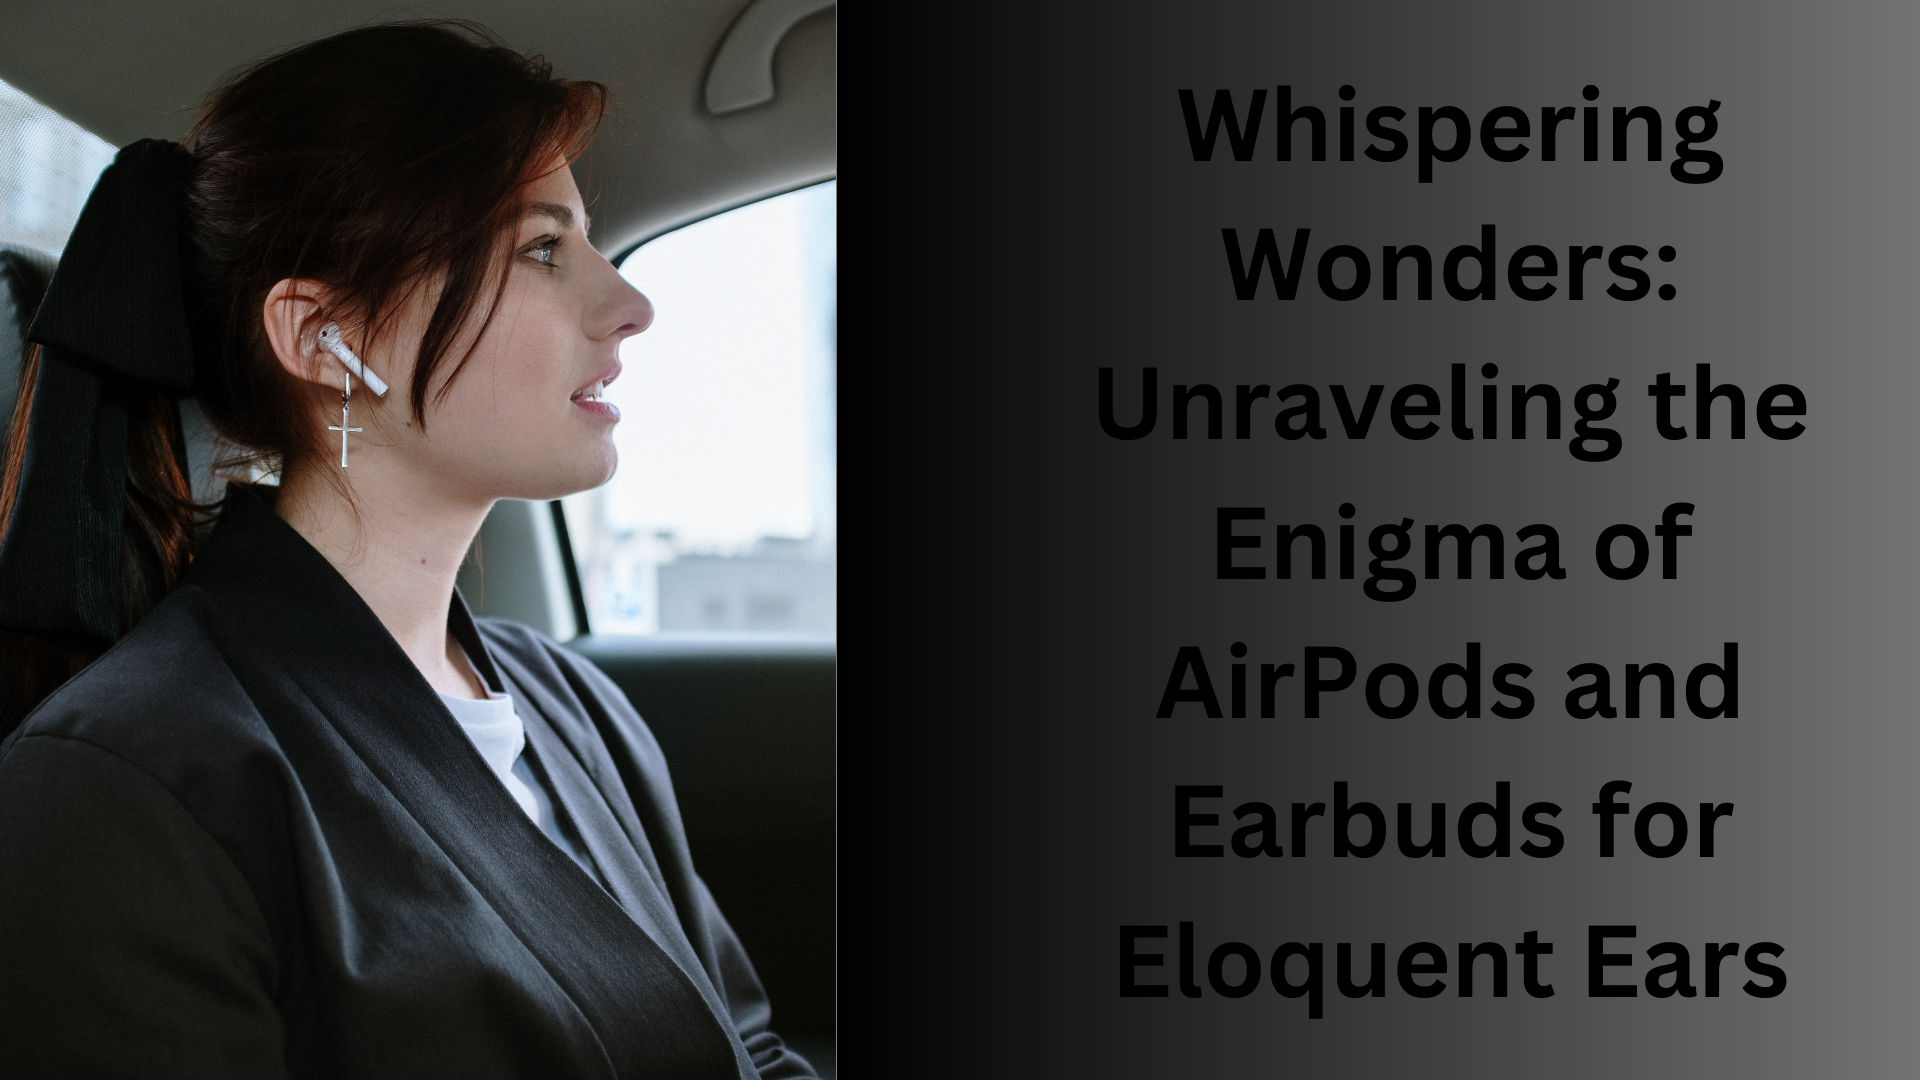 Whispering Wonders Unraveling the Enigma of AirPods and Earbuds for Eloquent Ears